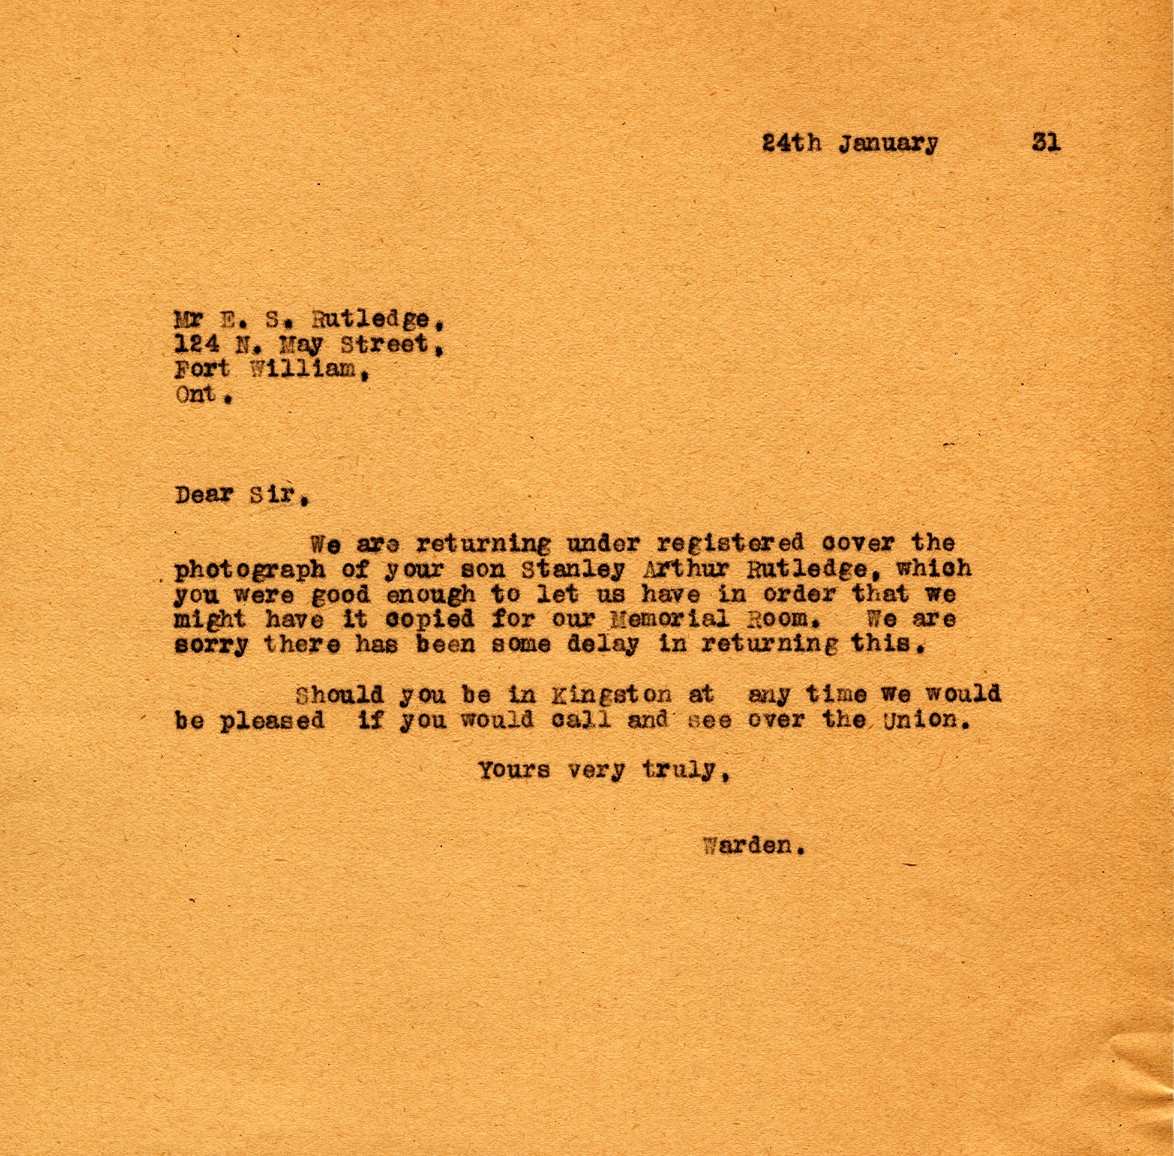 Letter from the Warden to Mr. E.S. Rutledge, 24th January 1931